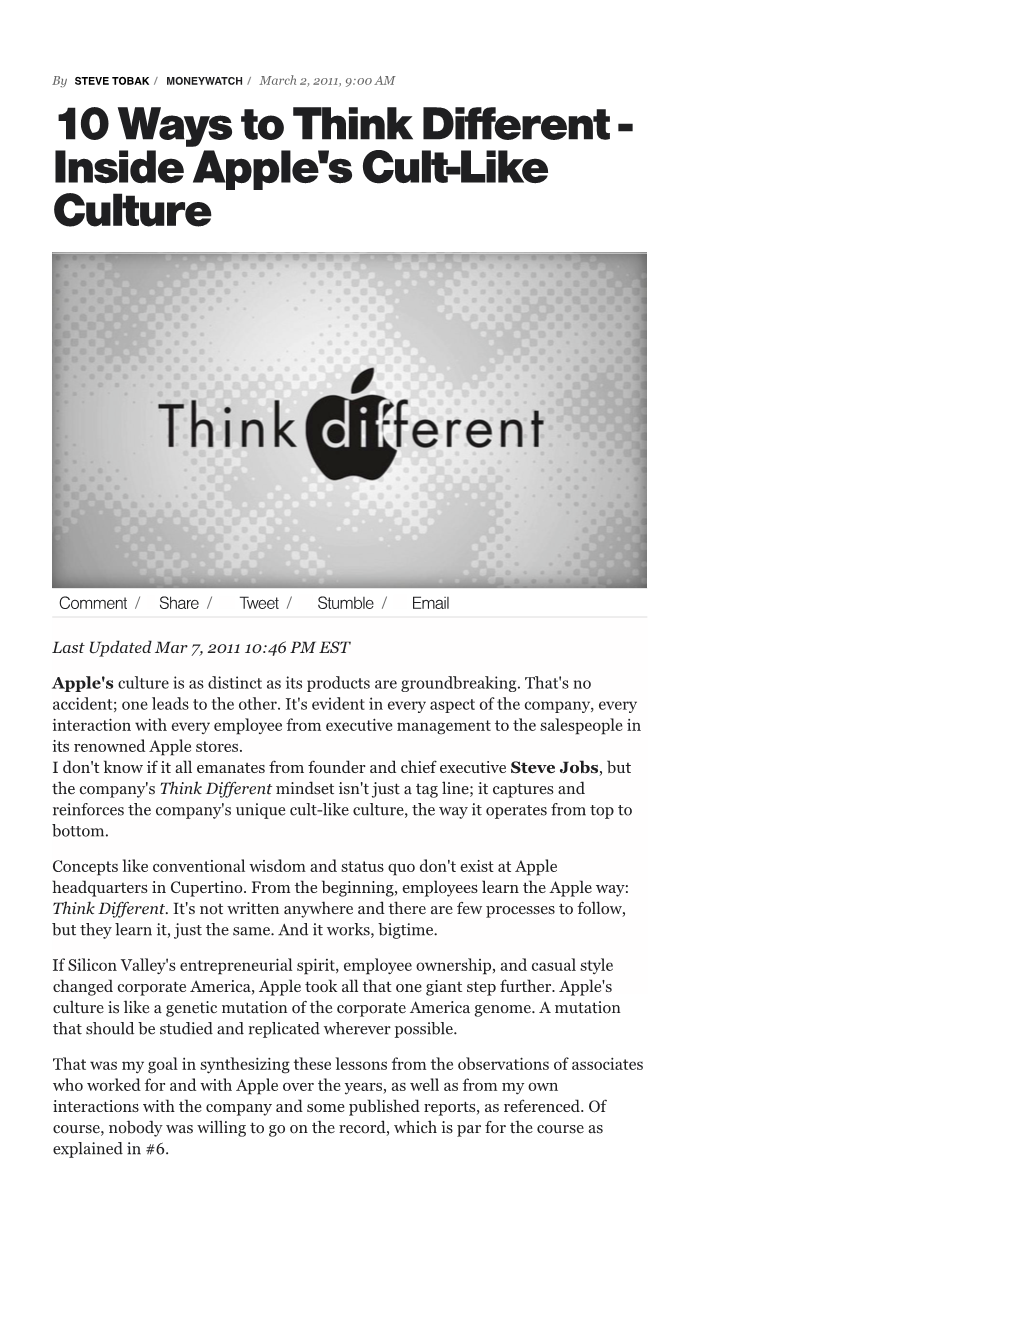 10 Ways to Think Different - Inside Apple's Cult-Like Culture